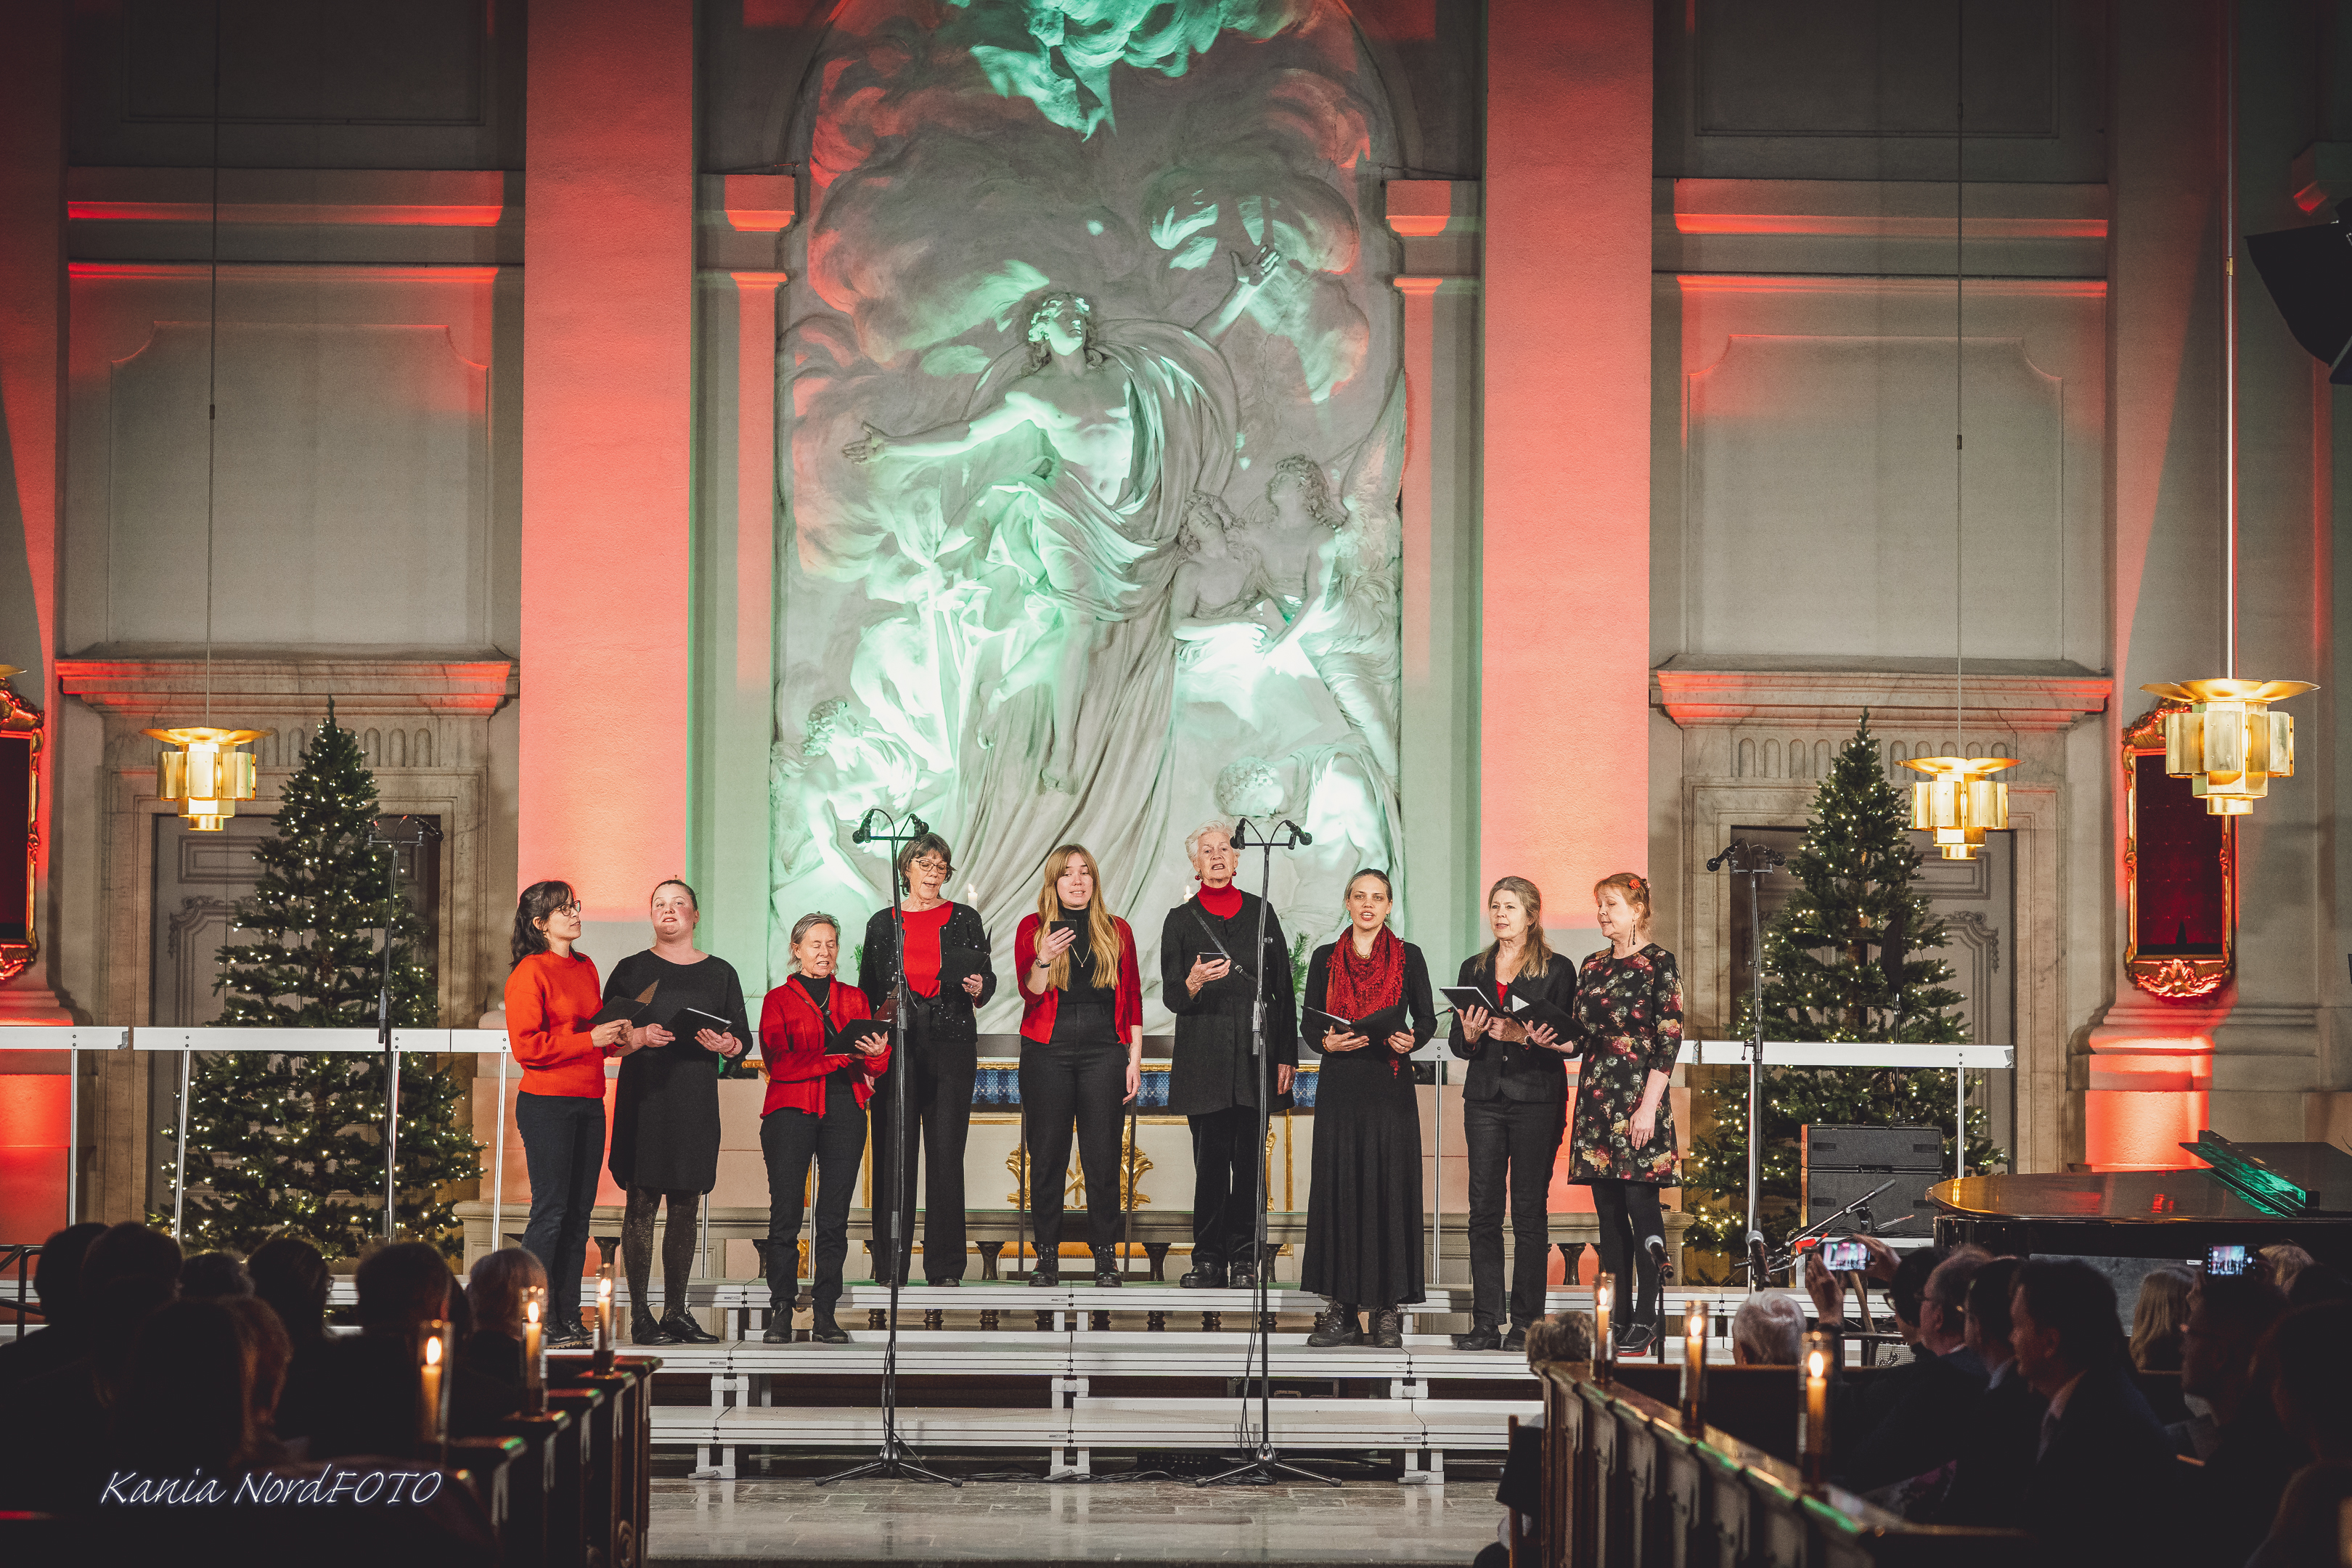 The Stockholm women's folk choir "Perunika" took part in the third edition of the multilingual Christmas concert "Christmas songs from the European Union" in Stockholm